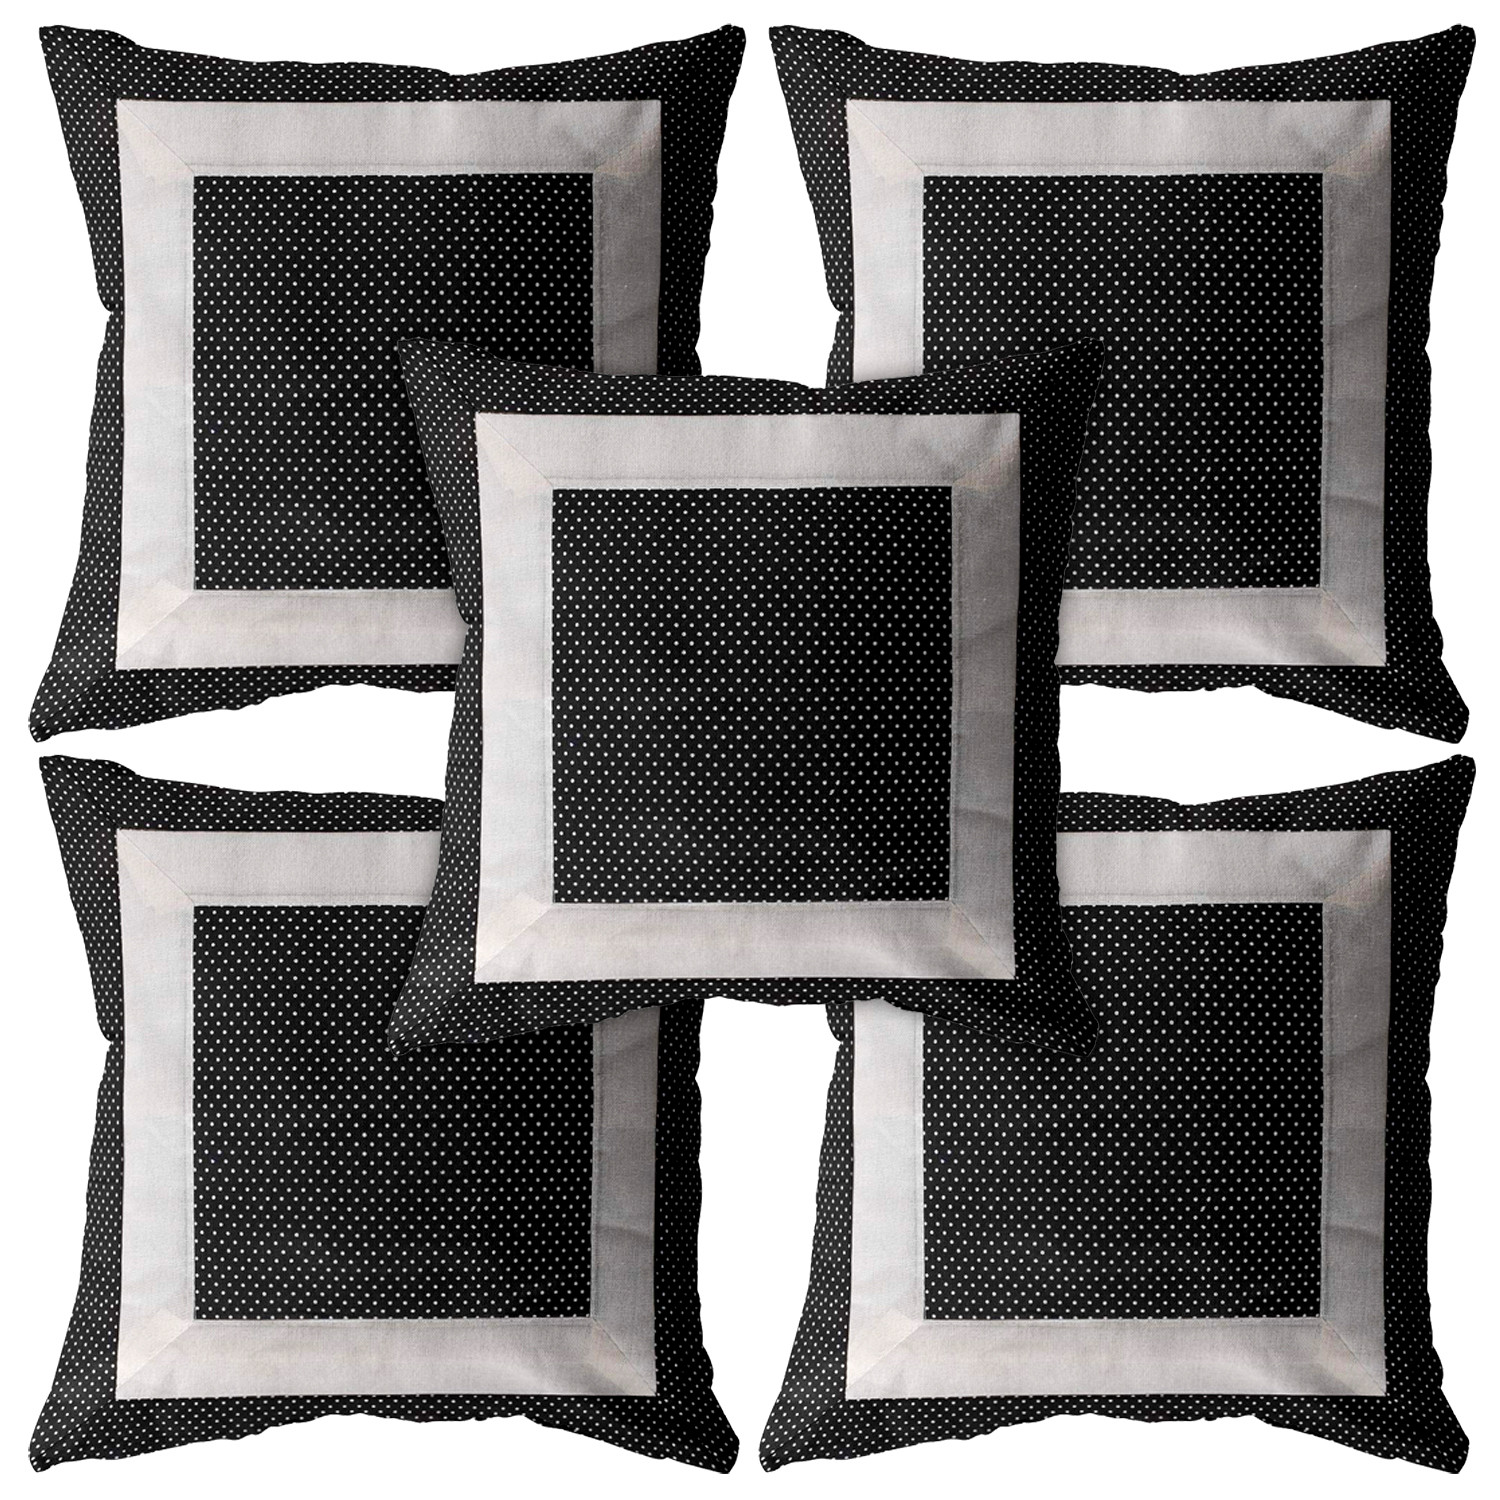 Kuber Industries Dot Printed Cotton Comfortable Decorative Throw Pillow Case Square Cushion Cover Pillowcas 16x16 Inches,(Black)